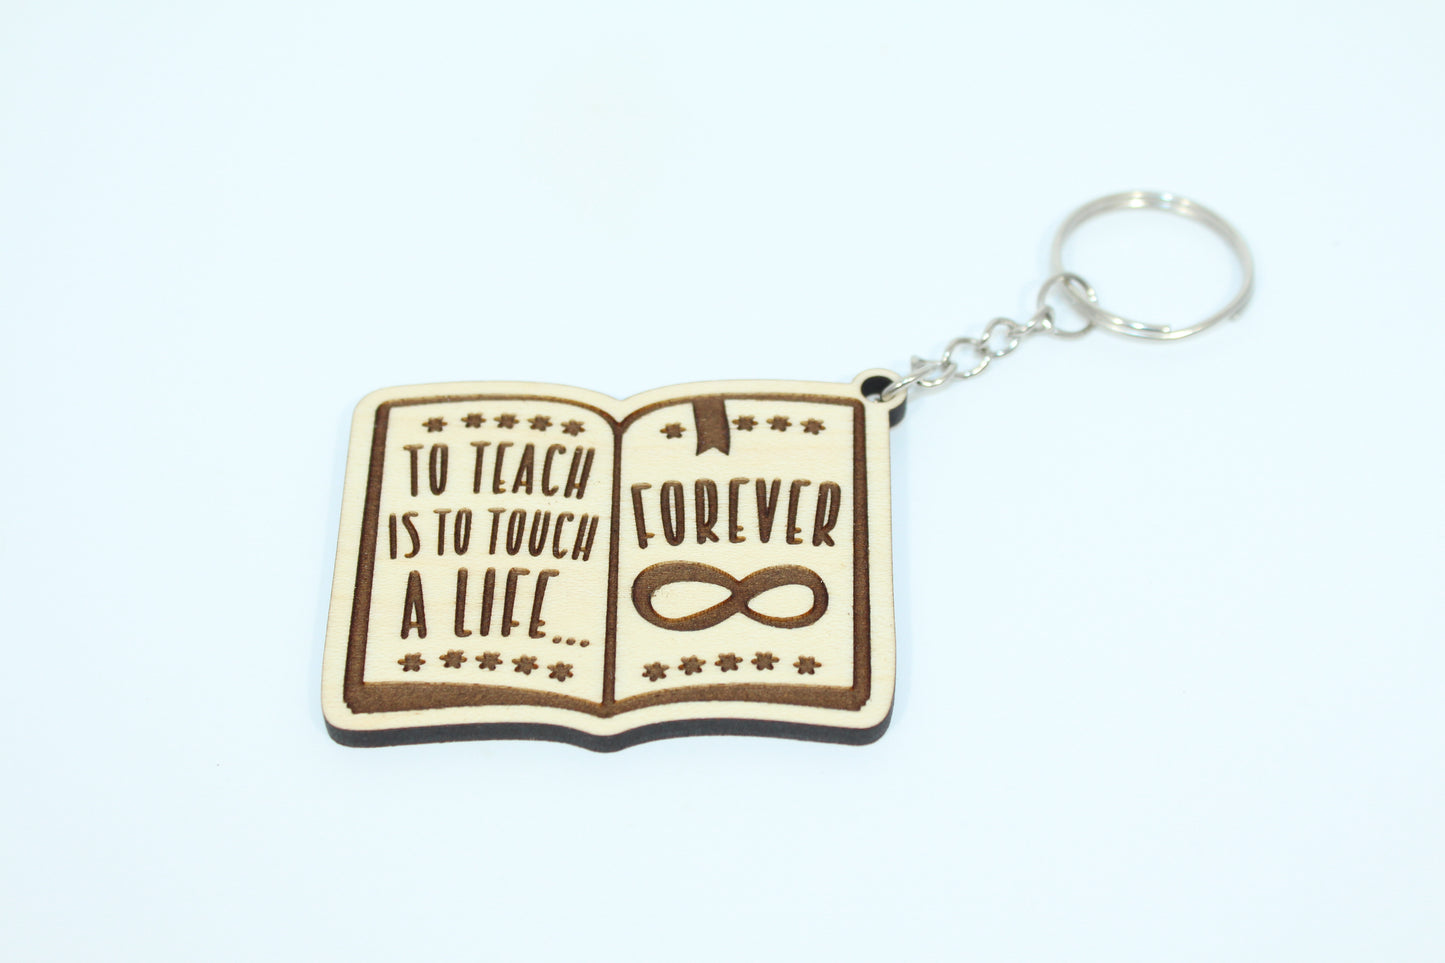 To Teach a Life Forever Keychain